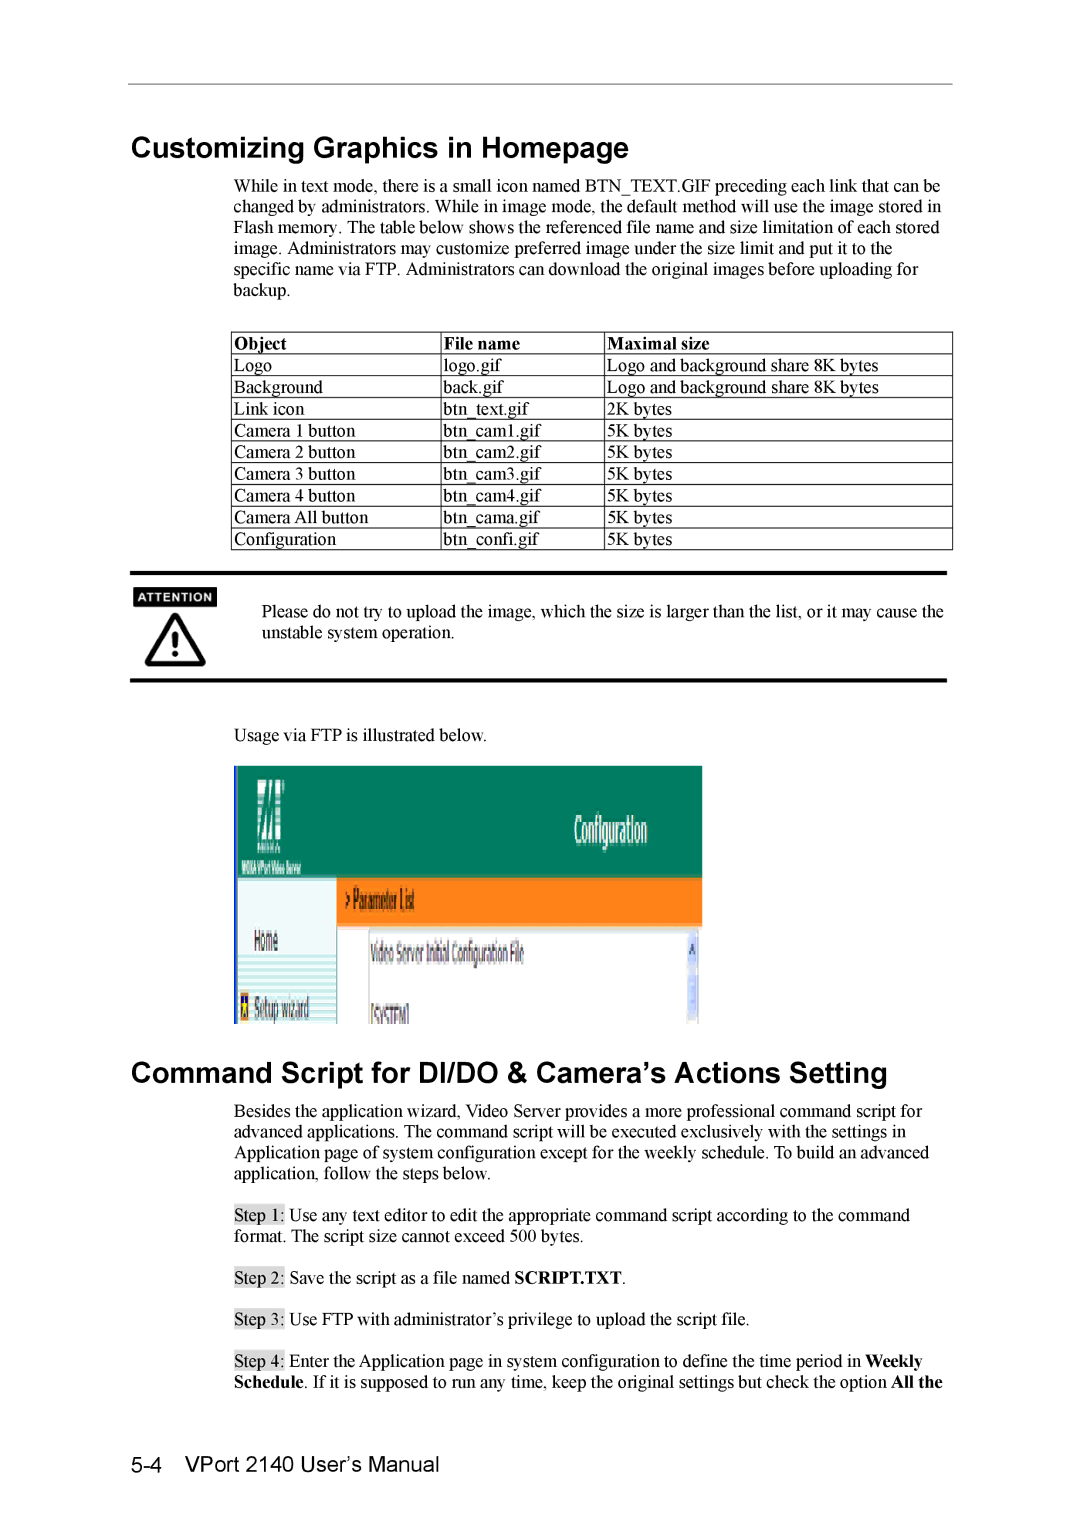 Moxa Technologies 2140 user manual Customizing Graphics in Homepage, Command Script for DI/DO & Camera’s Actions Setting 